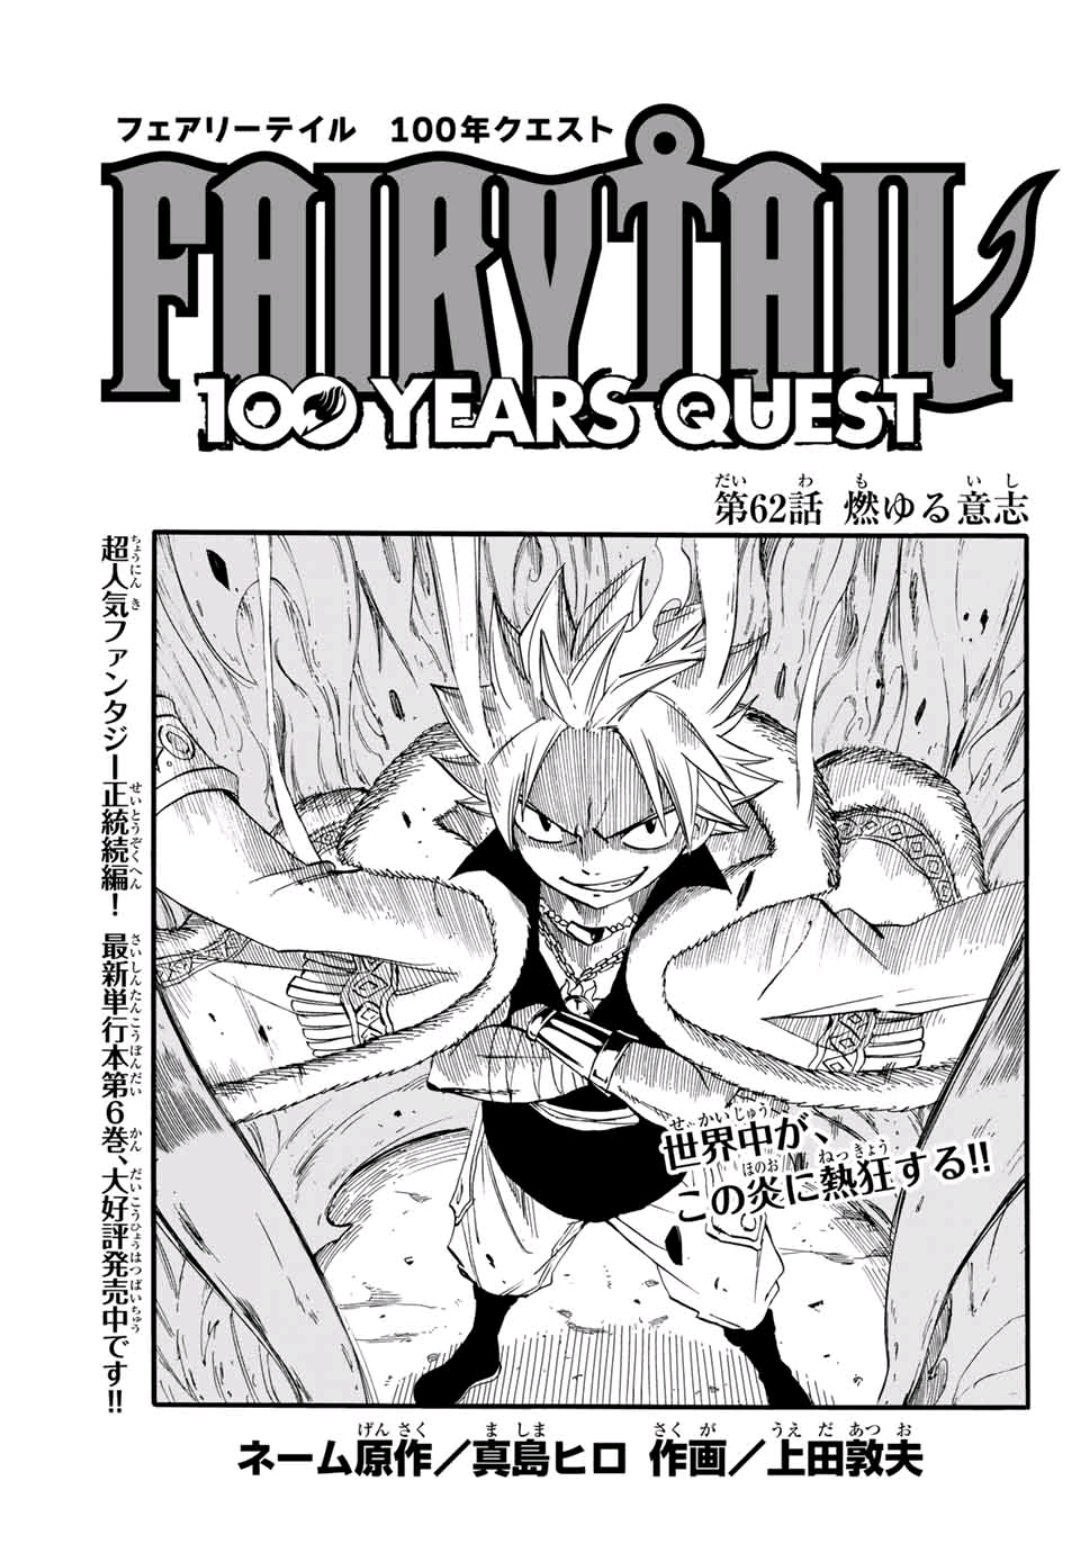 Fairy Tail 100 Years Quest Chapter 62 Fairy Tail Wiki Fandom